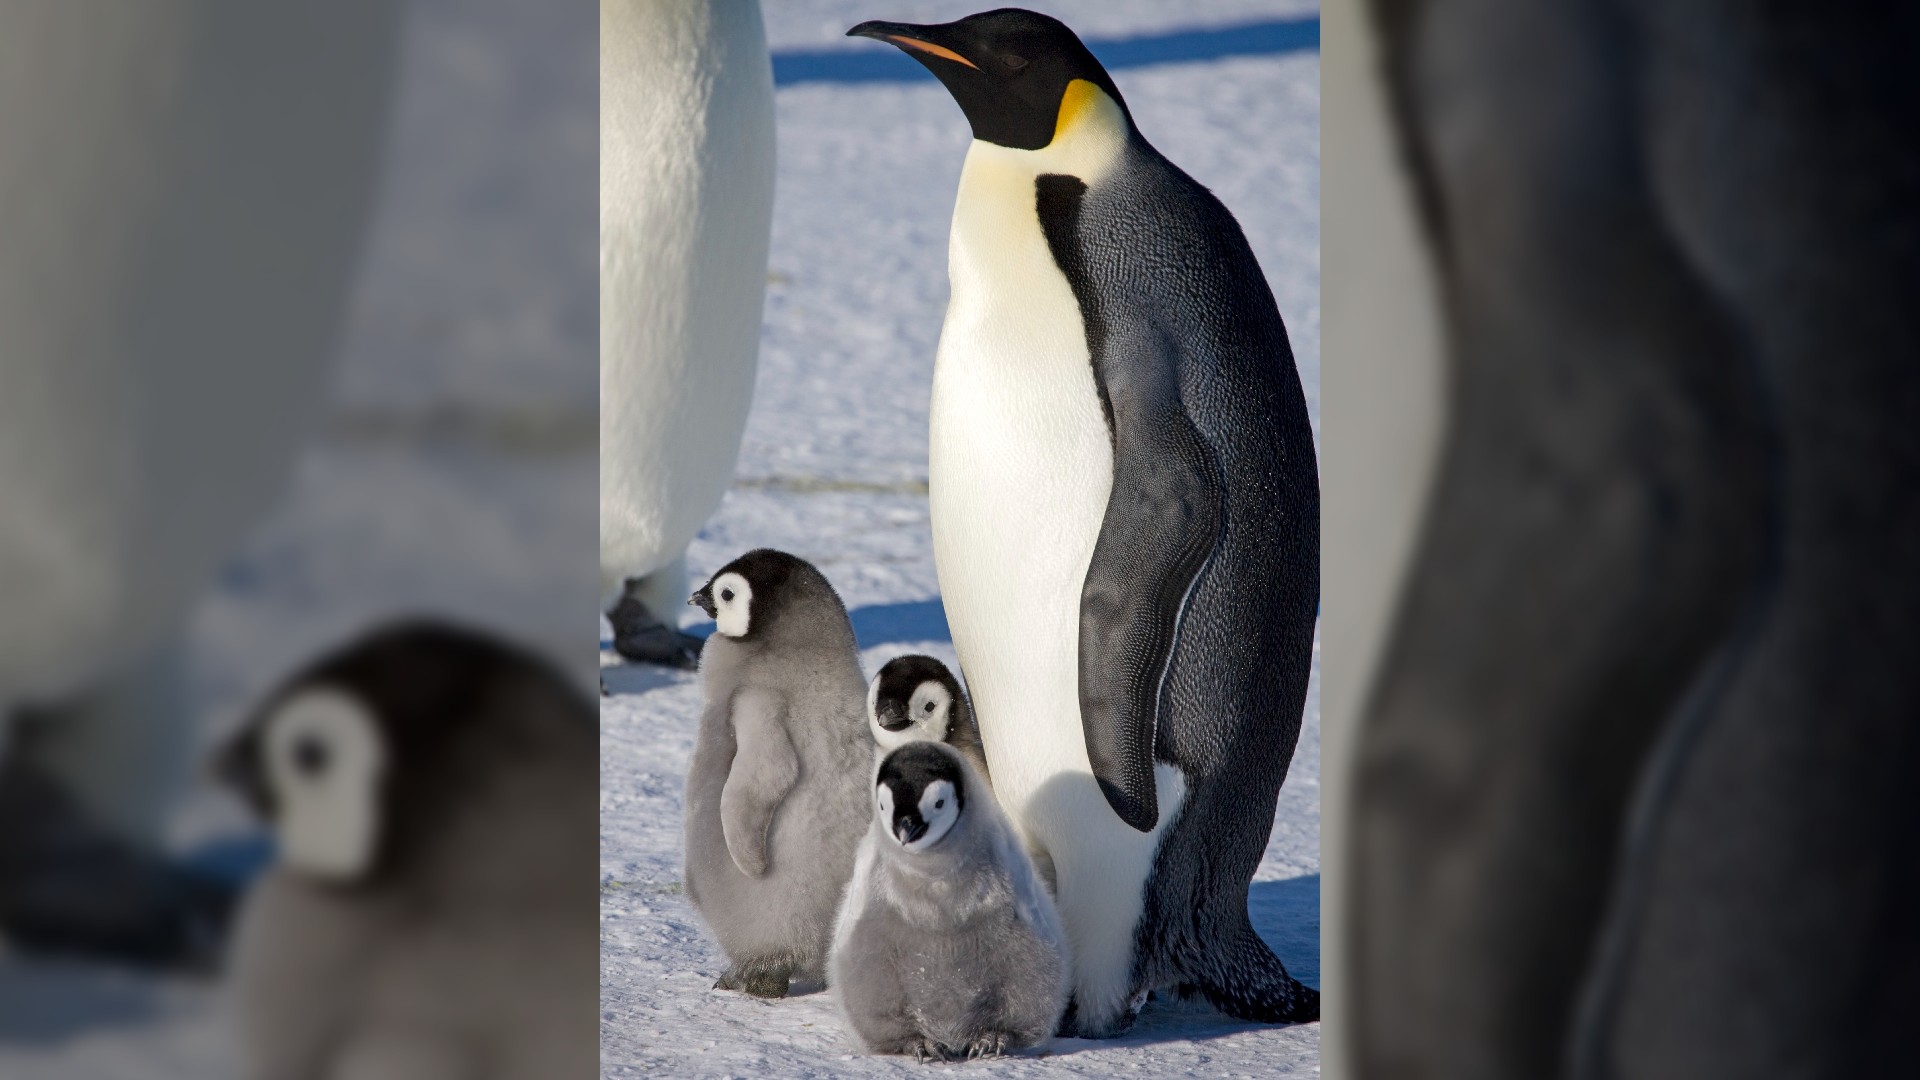 Emperor penguins are the largest of all penguins and stand up to 39 inches (100 cm) tall. They get their name from their dramatic black, white and yellow plumage. Here we see one adult penguin standing with 3 fluffy gray baby penguins.